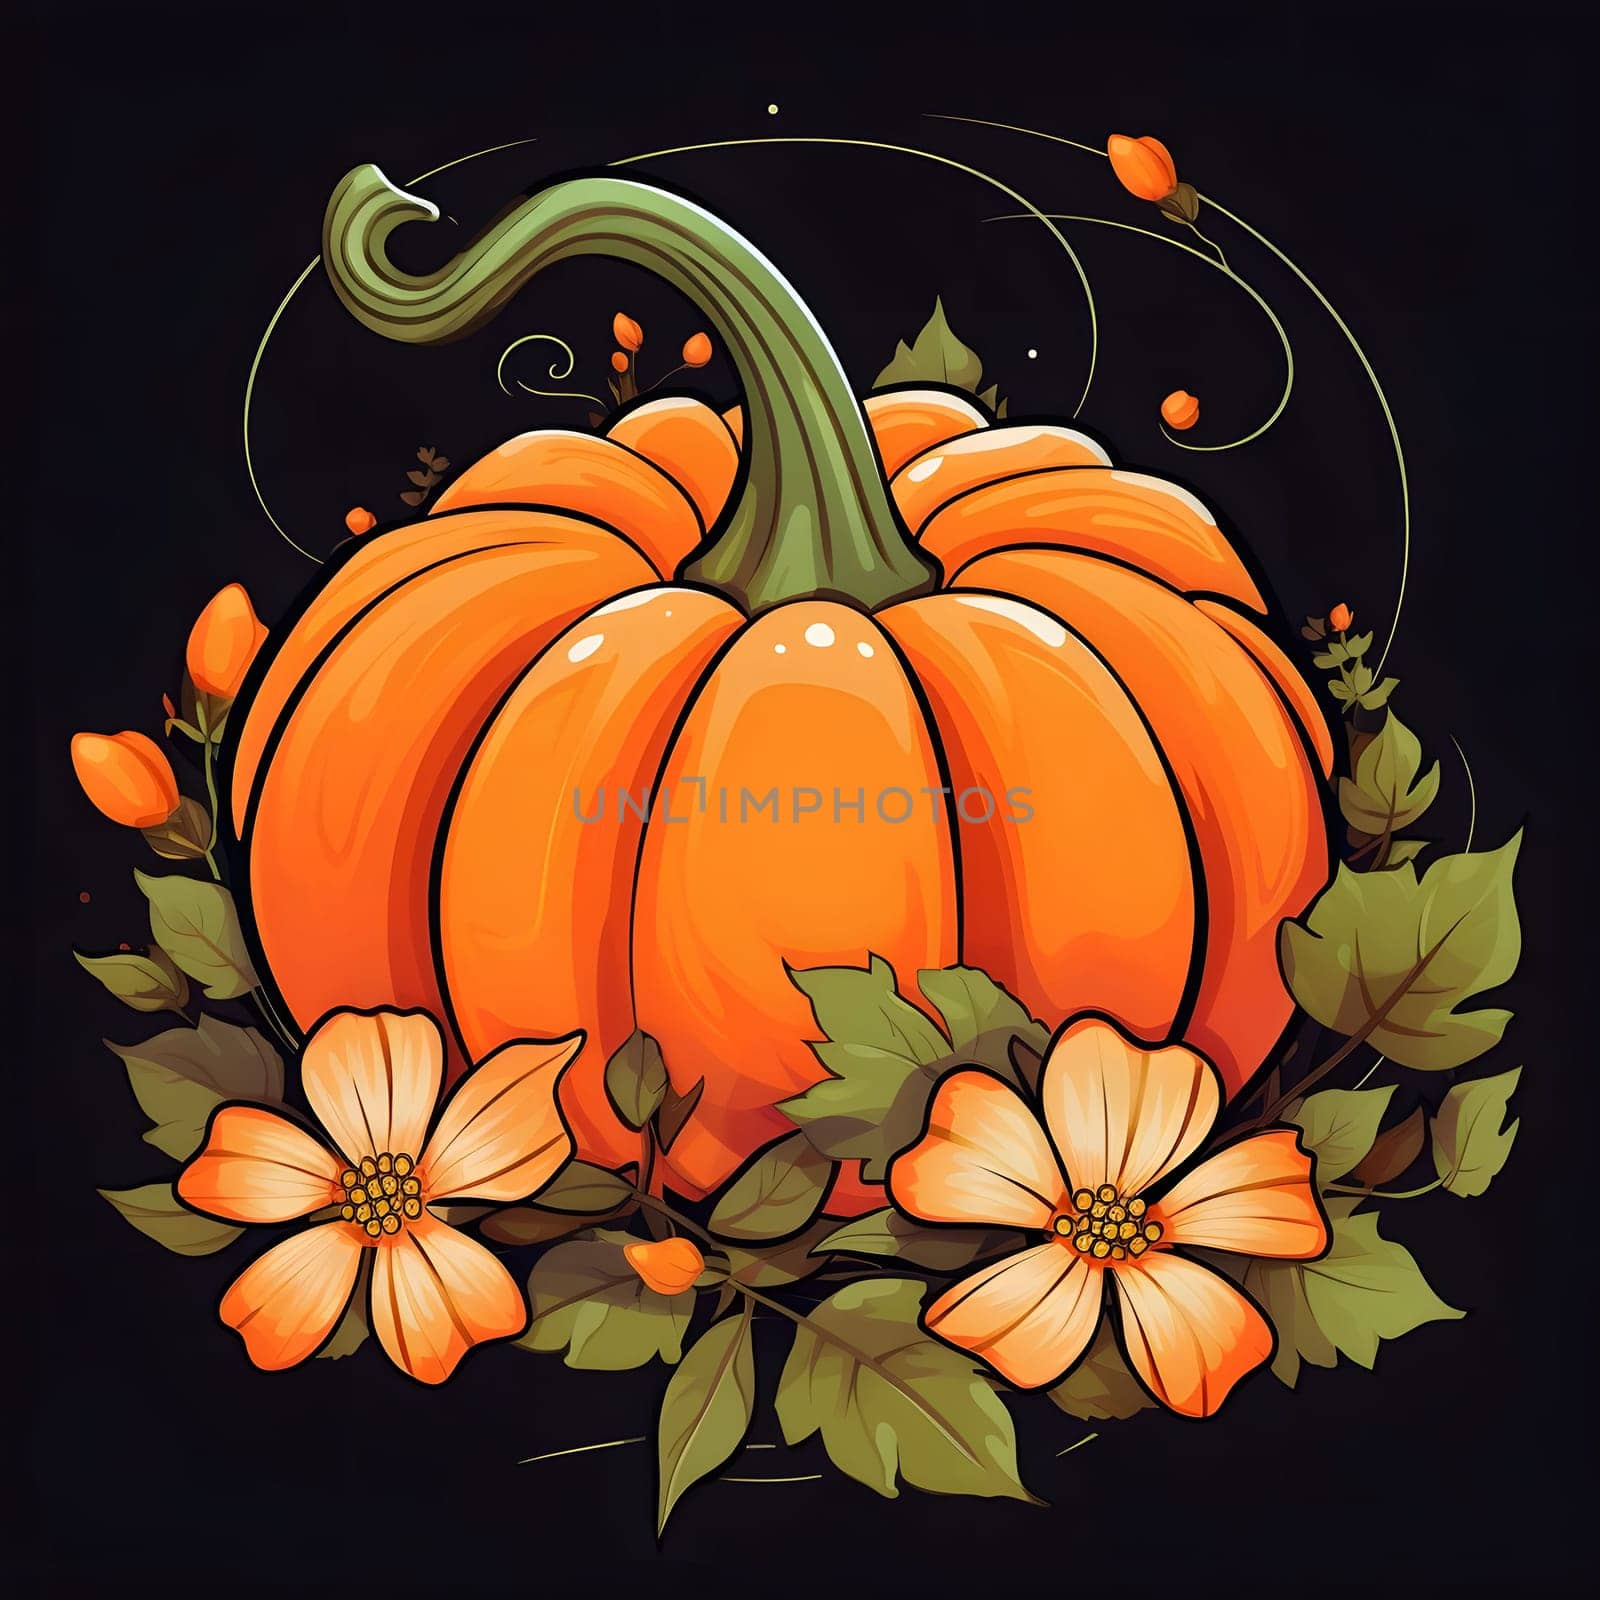 Pumpkin with flowers and leaves on a dark background. Pumpkin as a dish of thanksgiving for the harvest. An atmosphere of joy and celebration.